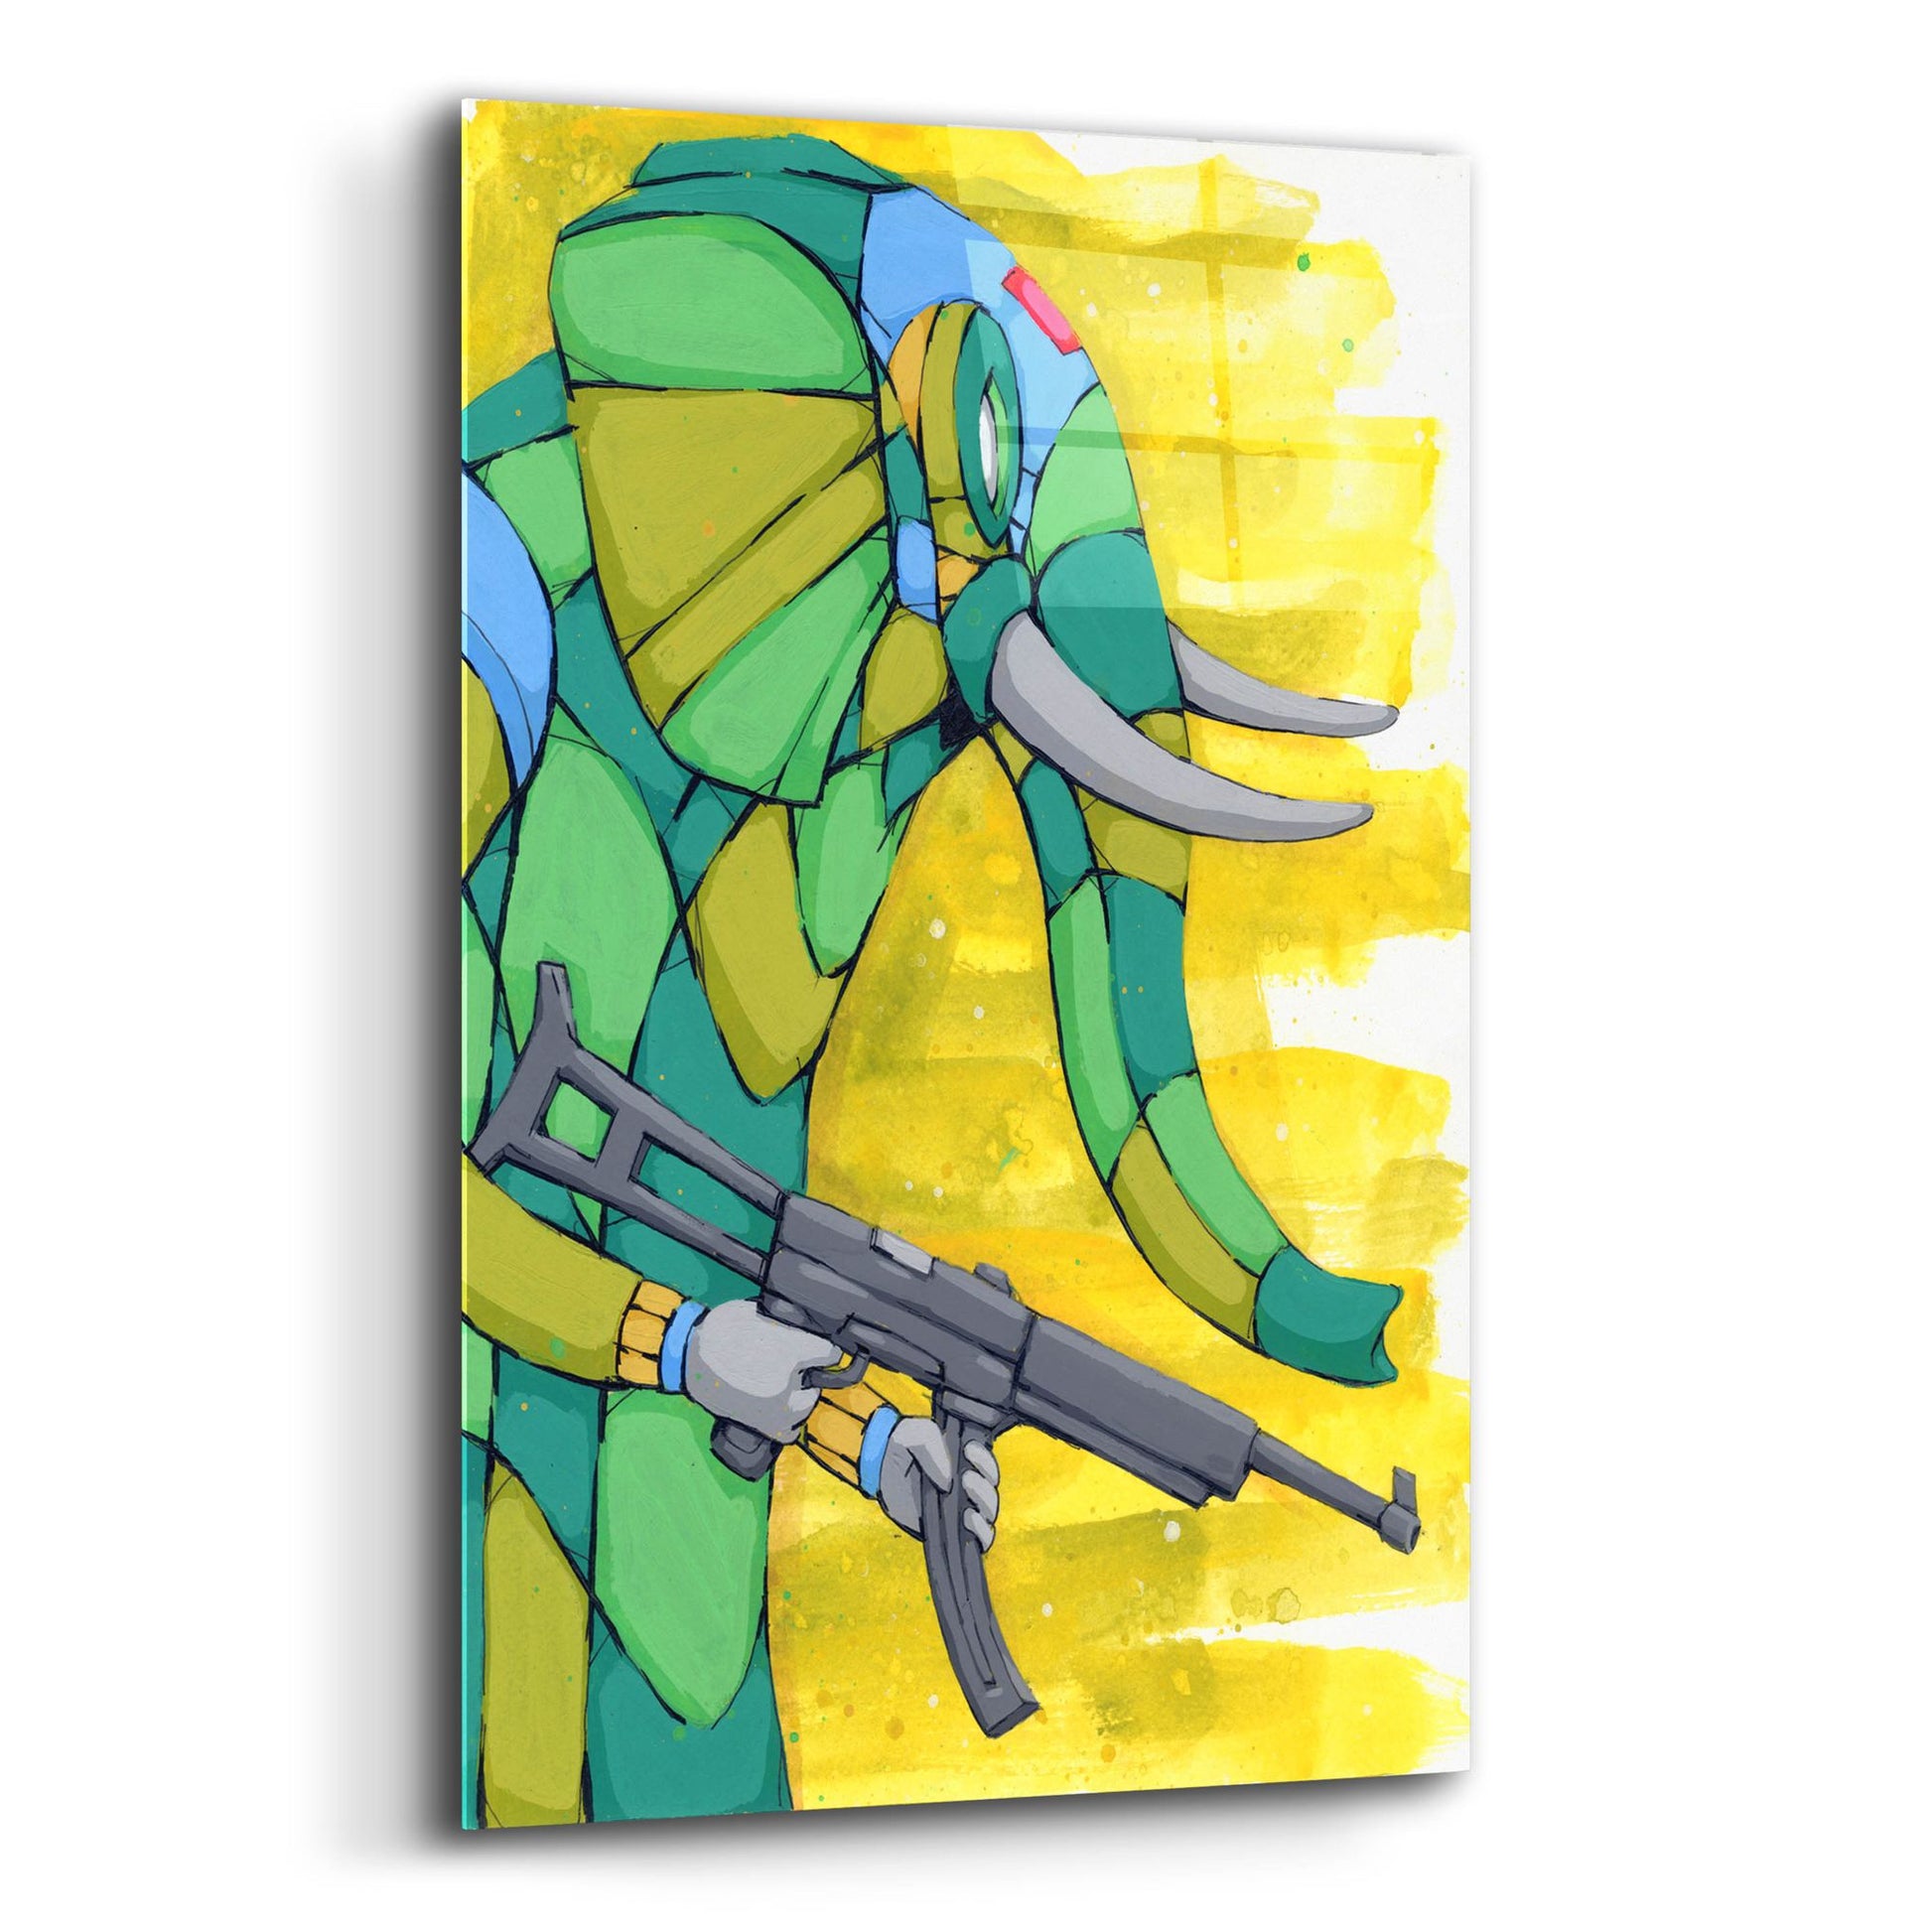 Epic Art 'Protecting his Ivory' by Ric Stultz, Acrylic Glass Wall Art,16x24